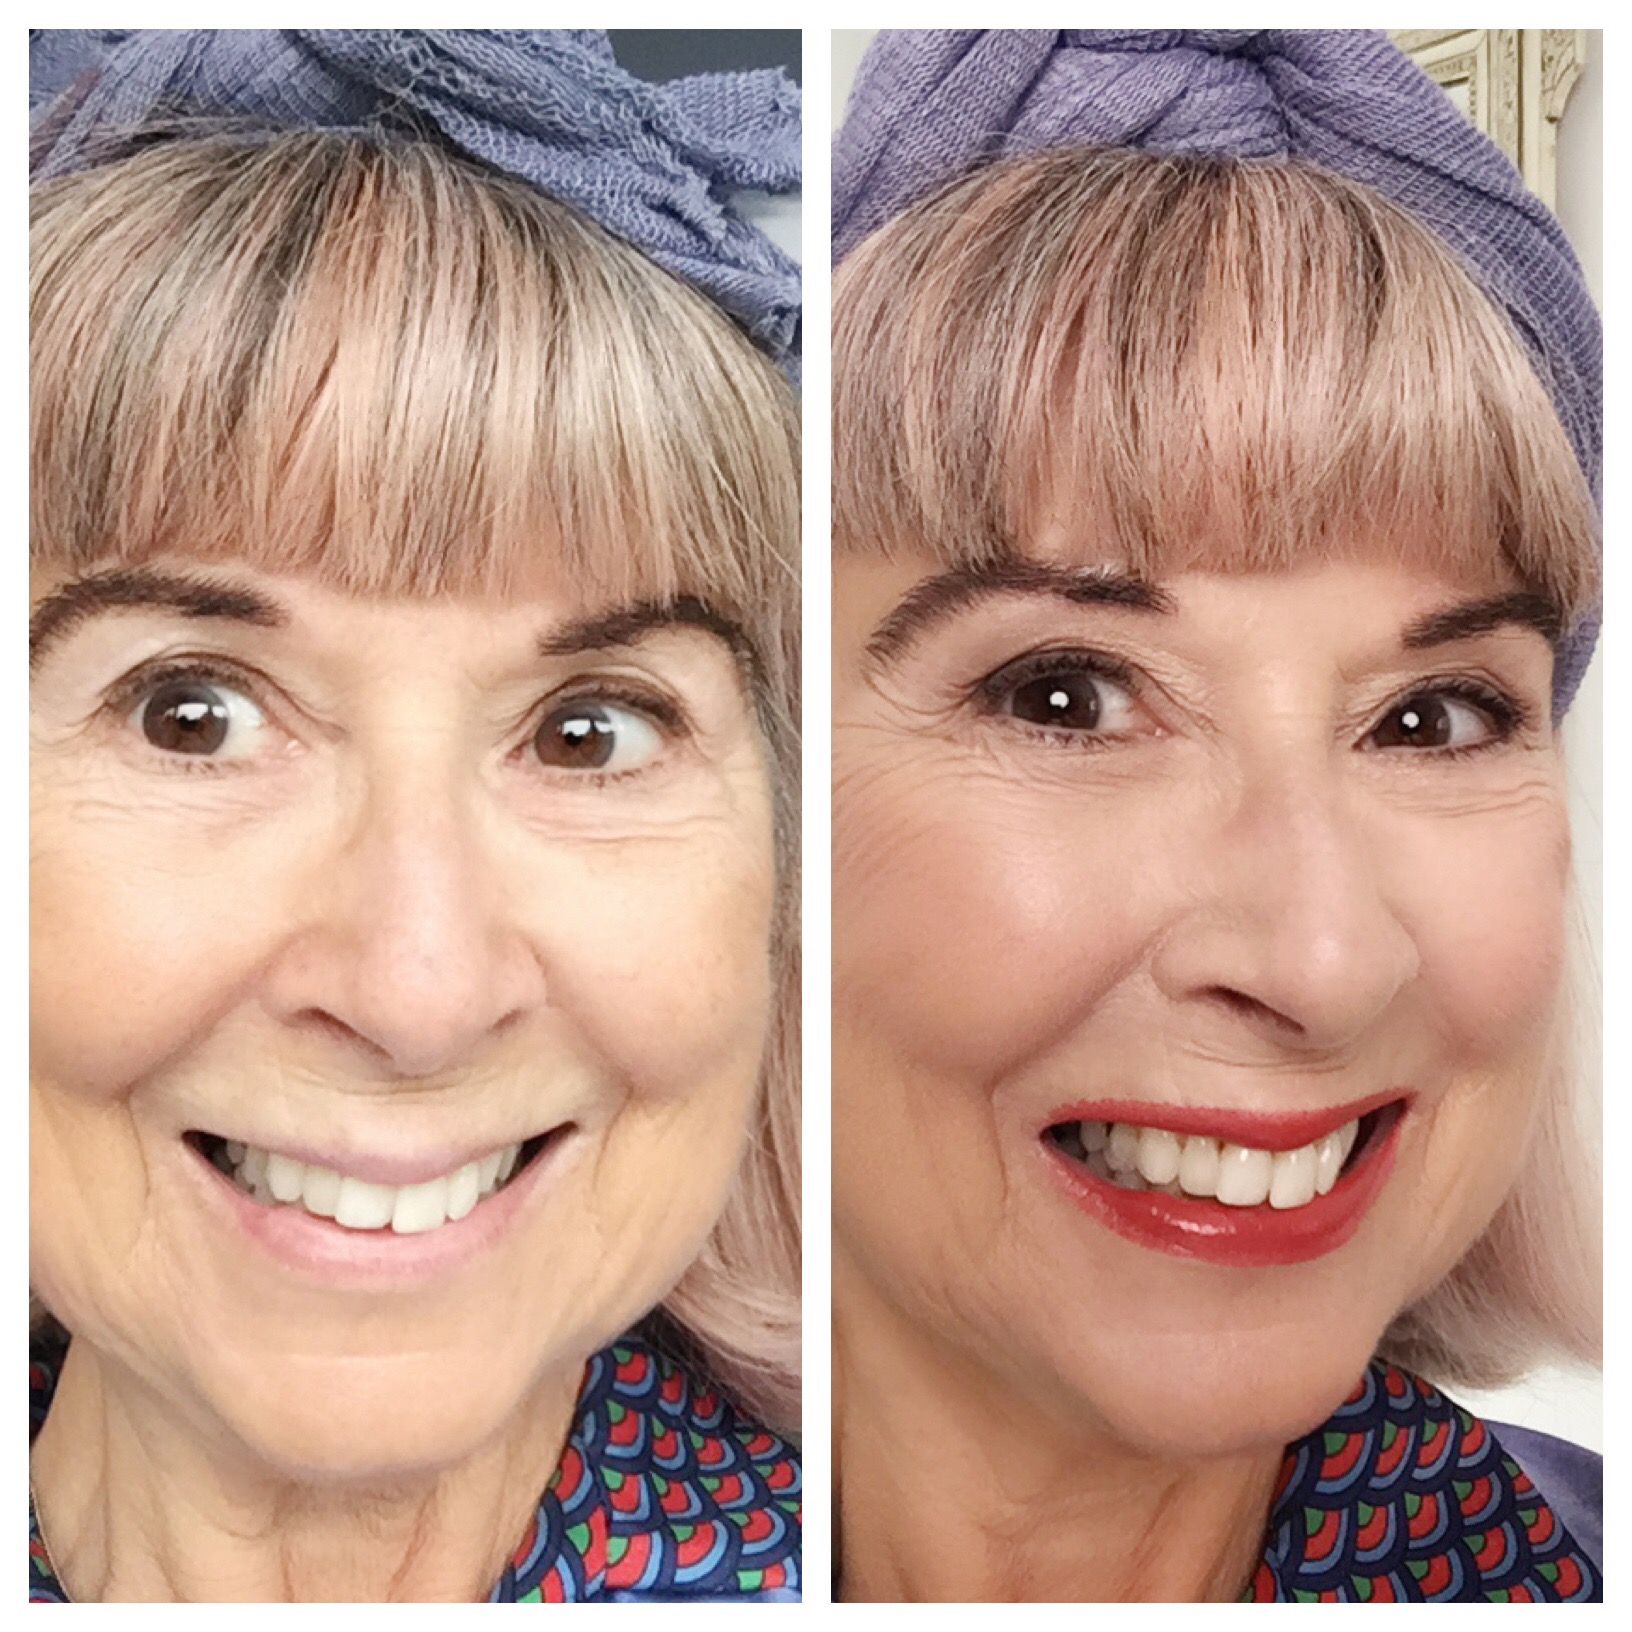 Makeover New Makeup For The Over 50s